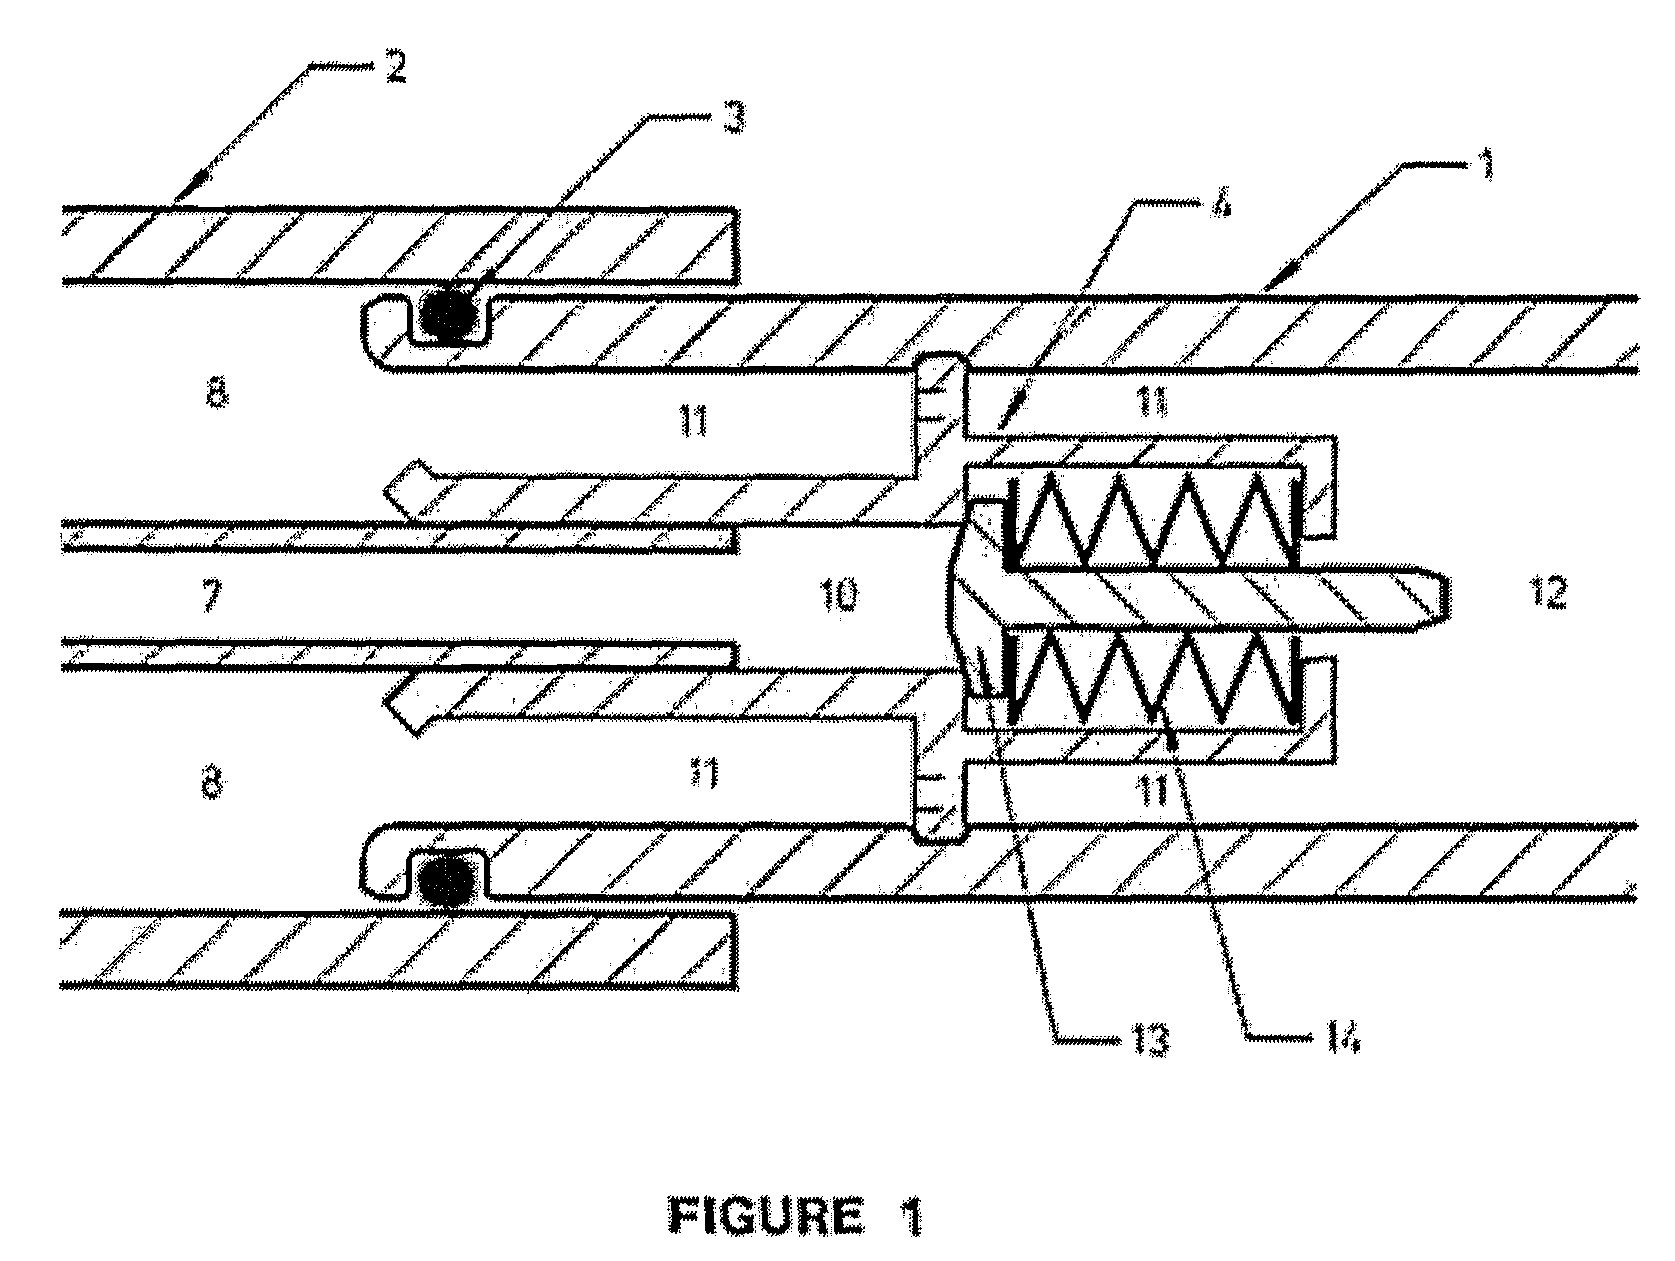 Injection, sealing valving and passageway system